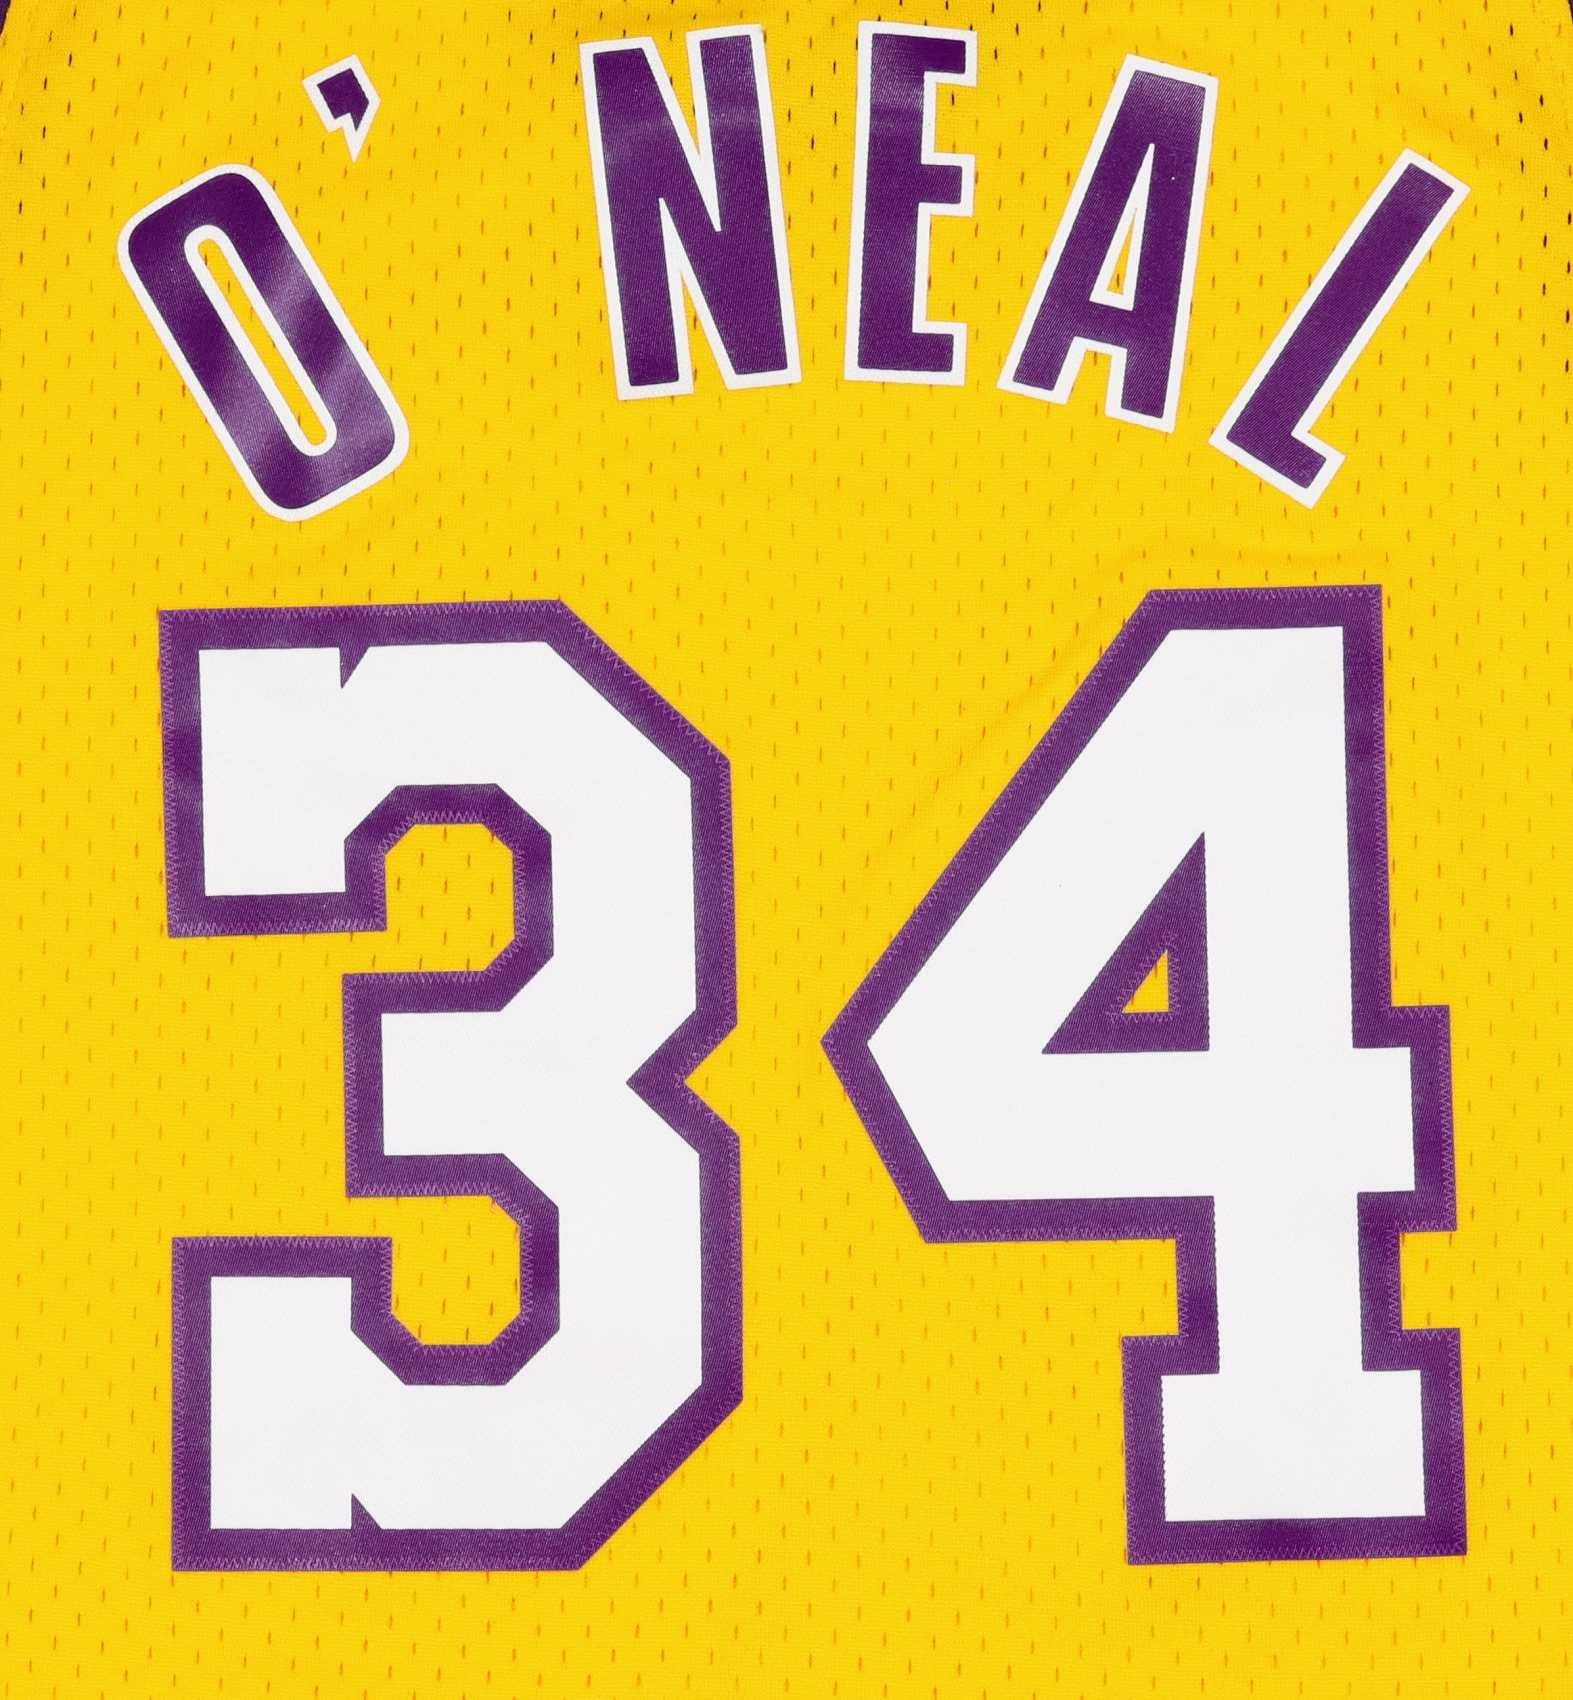 Shaquille ONeal #34 Los Angeles Lakers NBA Swingman Jersey Mitchell & Ness